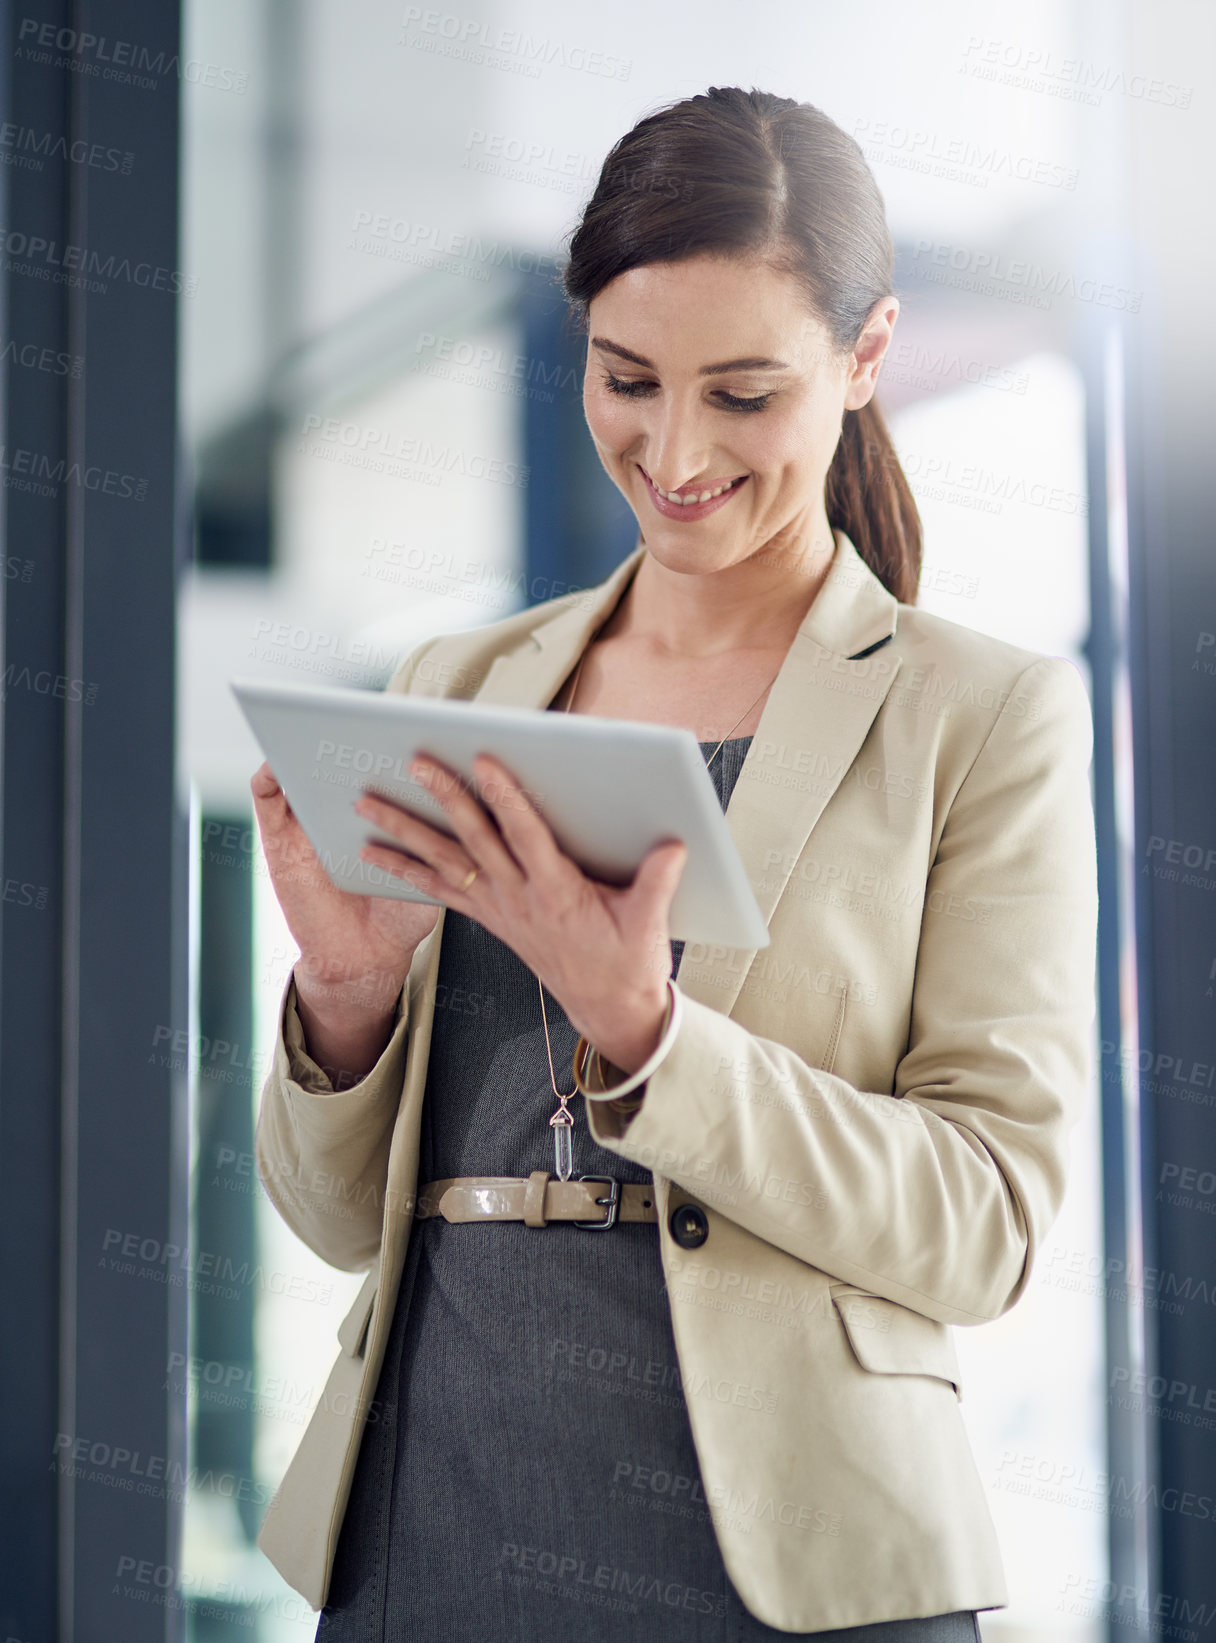 Buy stock photo Shot of a professional businesswoman using a digital tablet at work